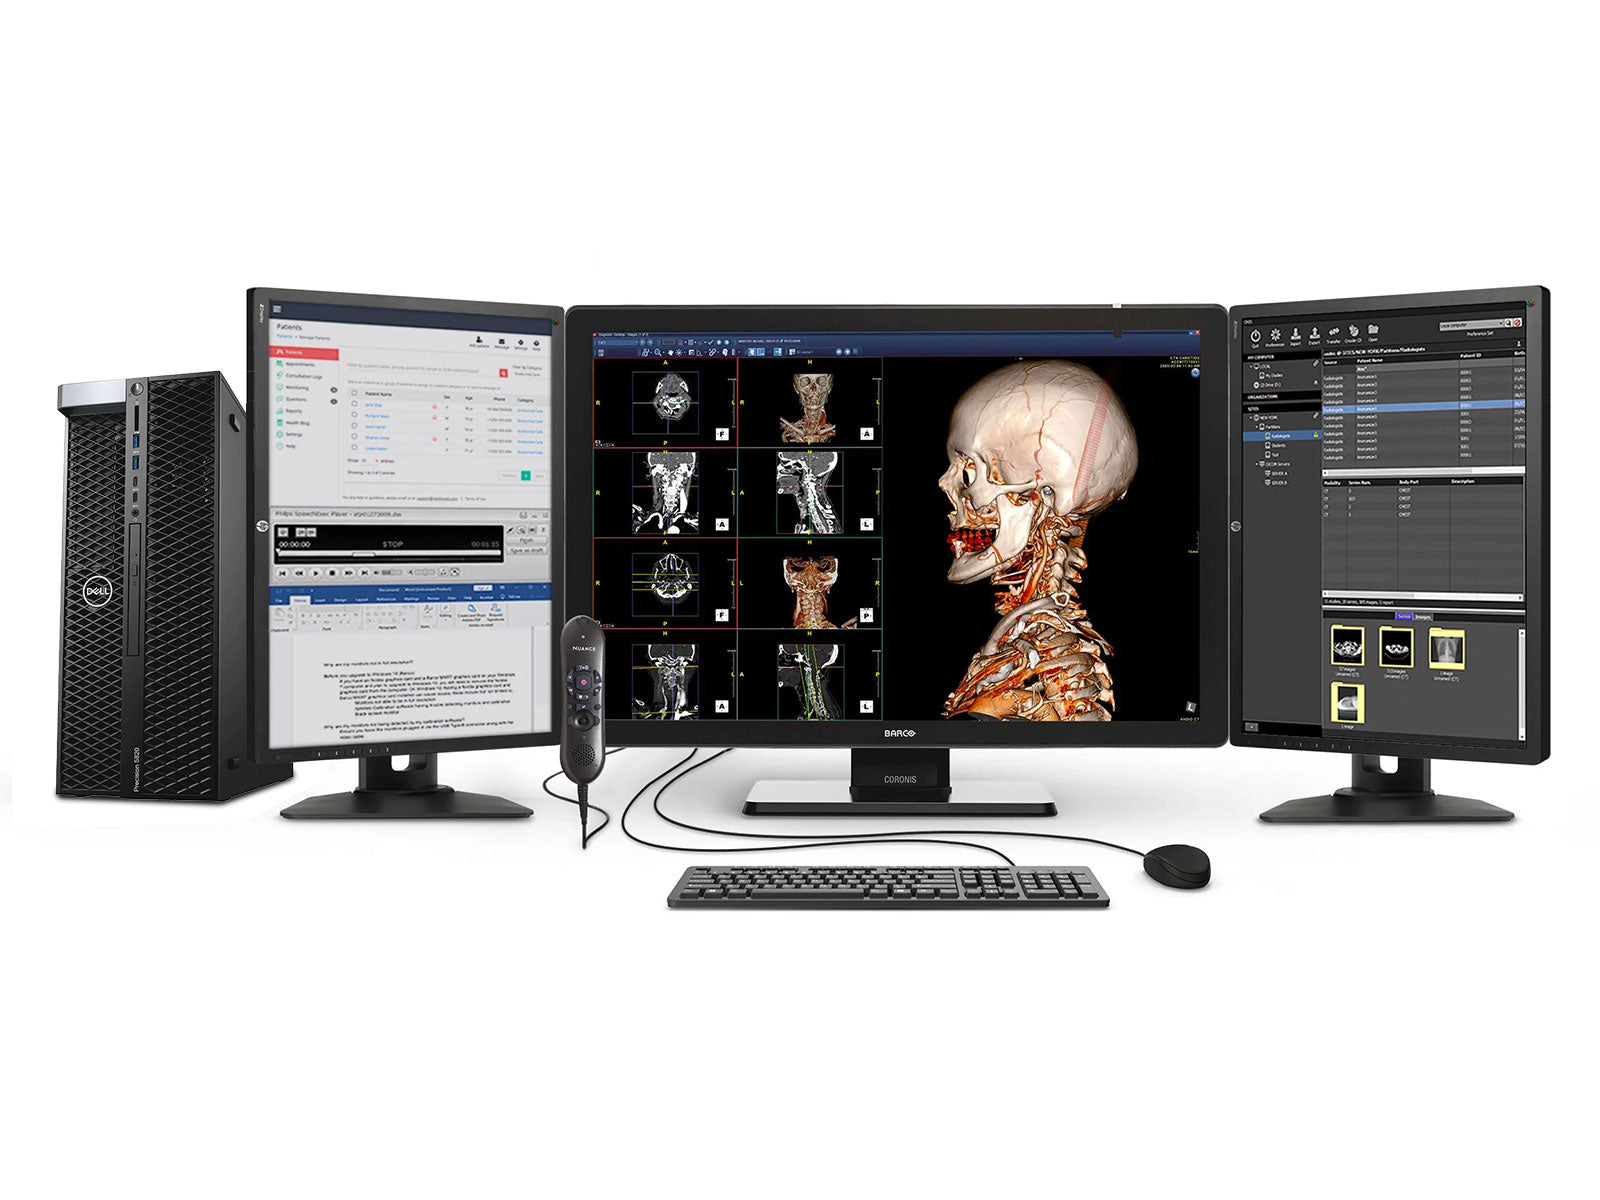 Complete PACS General Radiology Station | Barco 6MP Color LED Display | HP Workstation | Dictation Mic | Worklist Monitor (65305820R)